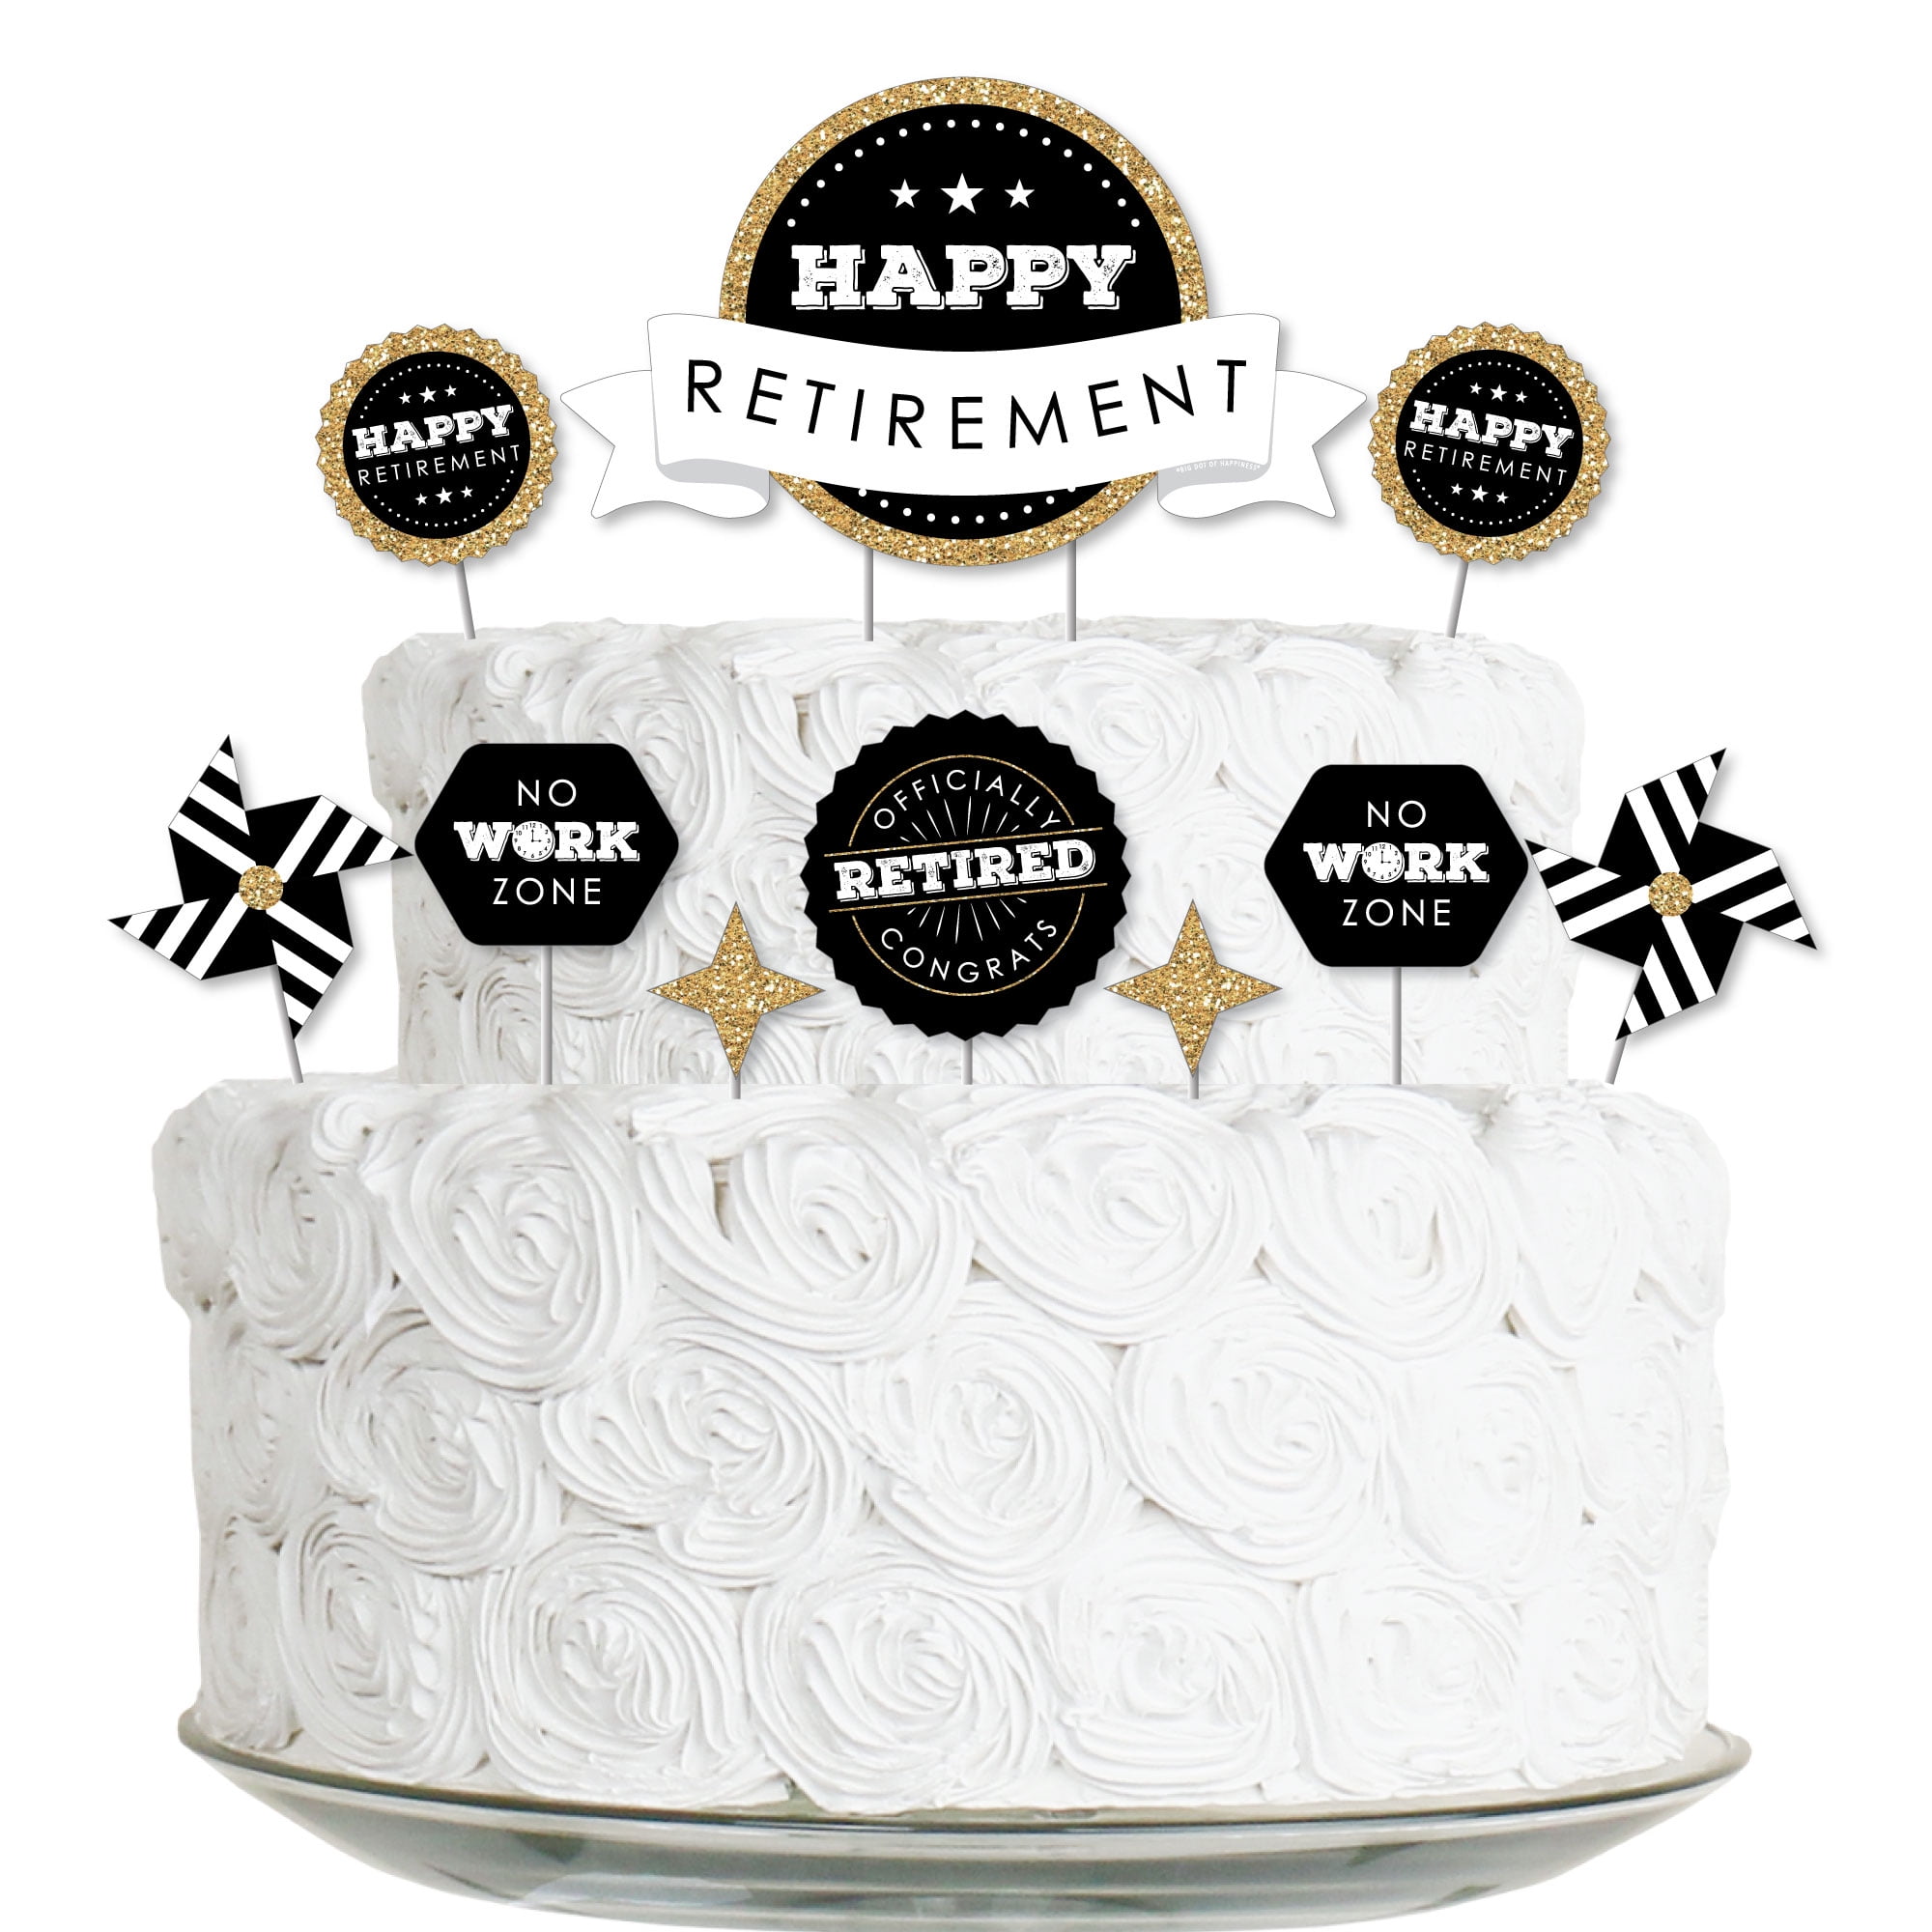 105 Ideas to Write on a Retirement Cake